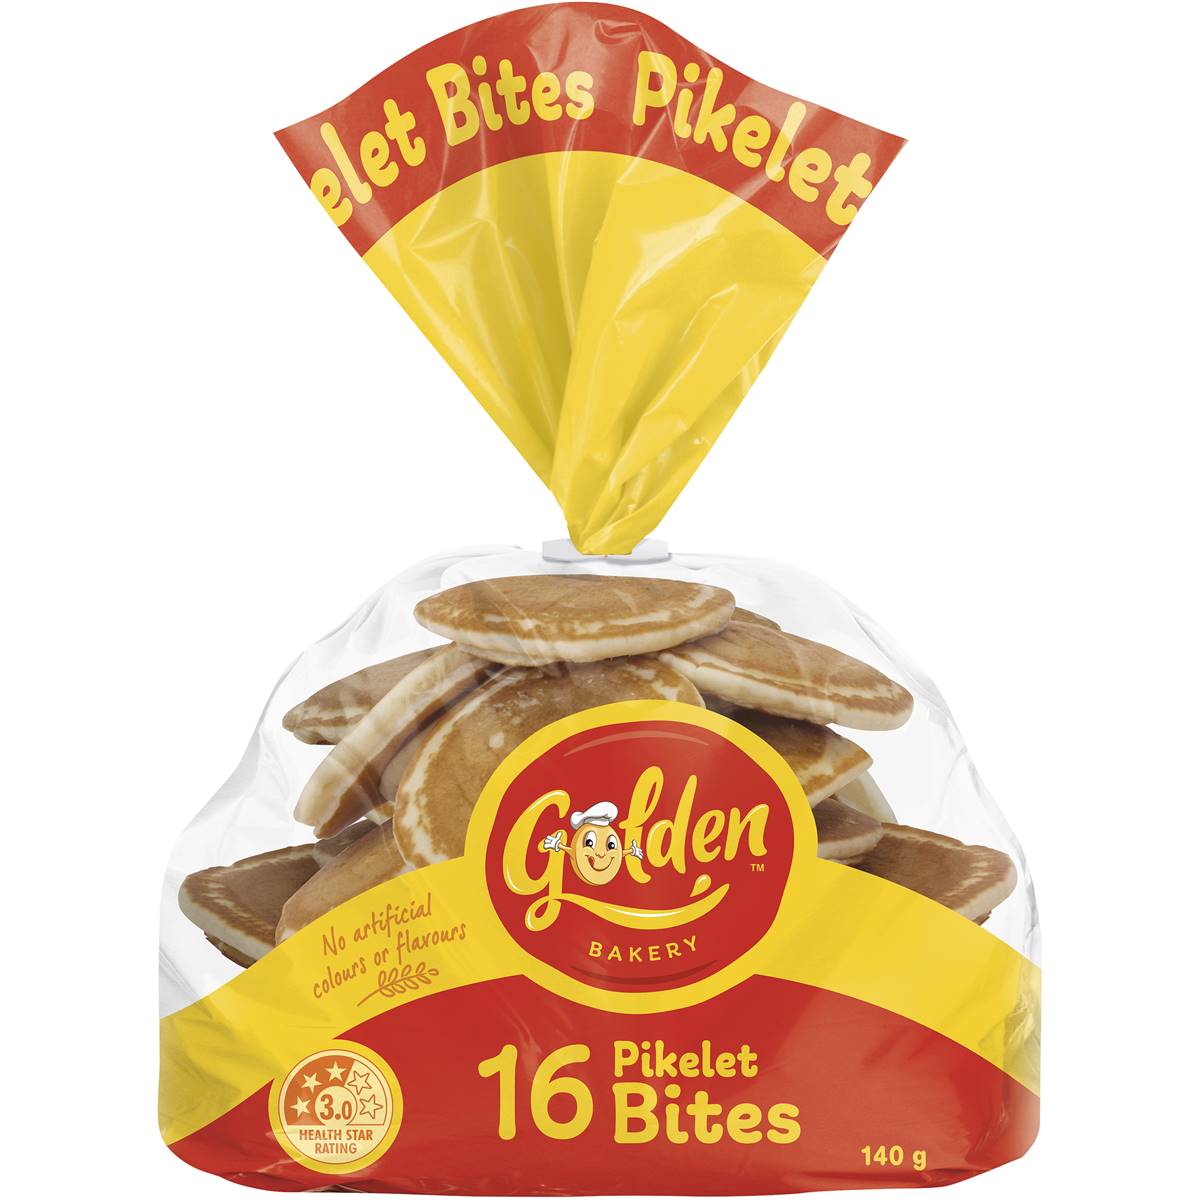 Golden Pikelets Bite Size